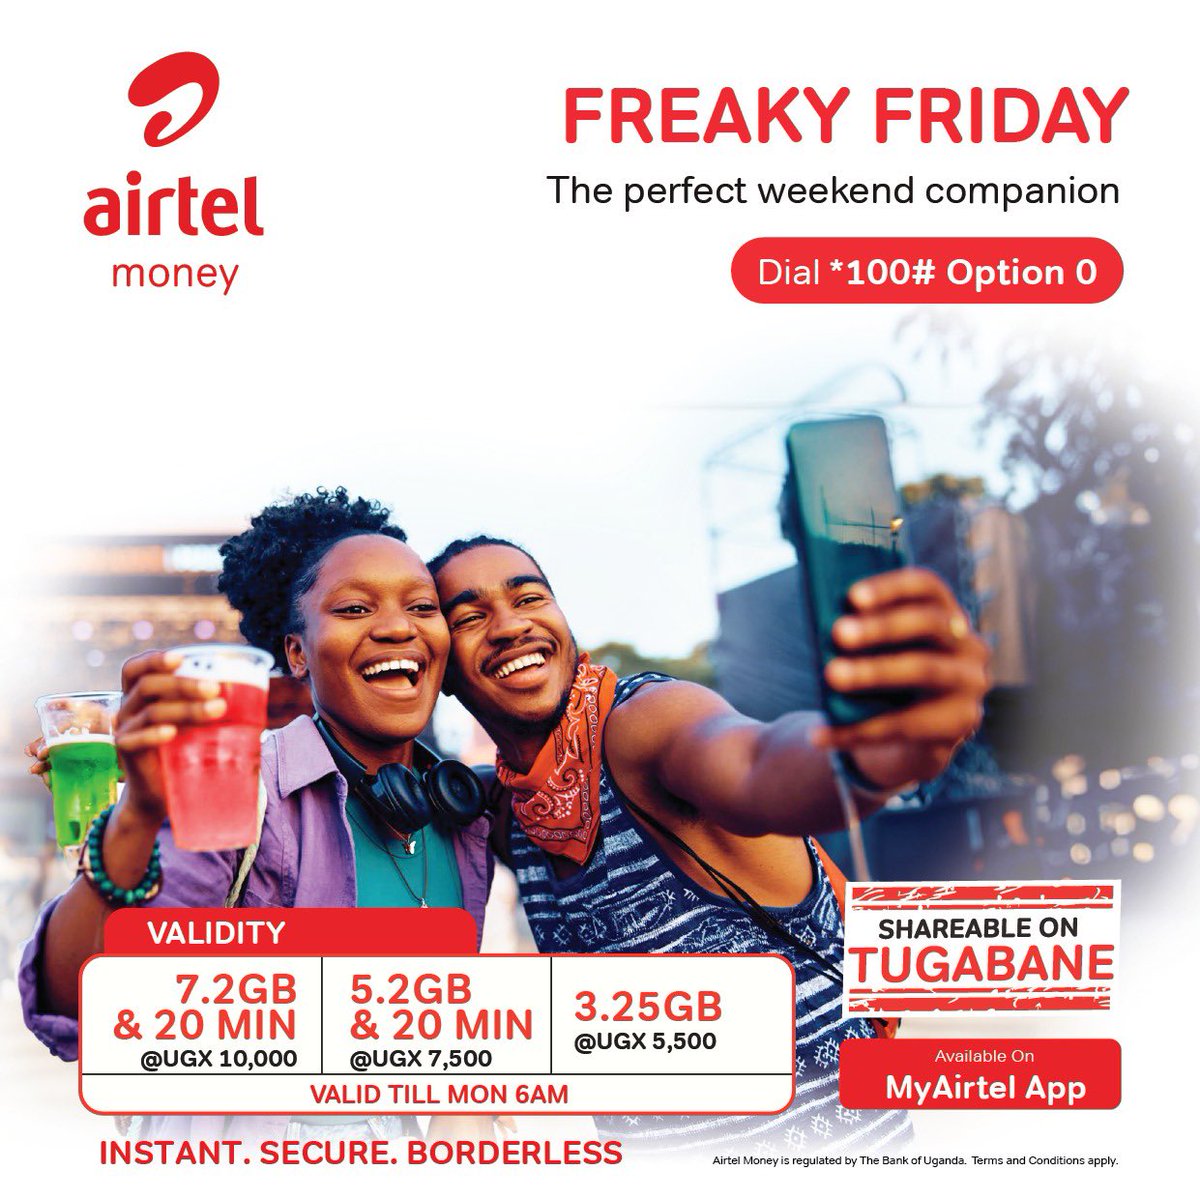 Its a #FreakyFriday , dail *100# Option 0 or use #MyAirtelApp  here airtelafrica.onelink.me/cGyr/qgj4qeu2 to enjoy the biggest and most reliable data plans in the country,  shareable with your friends and family .